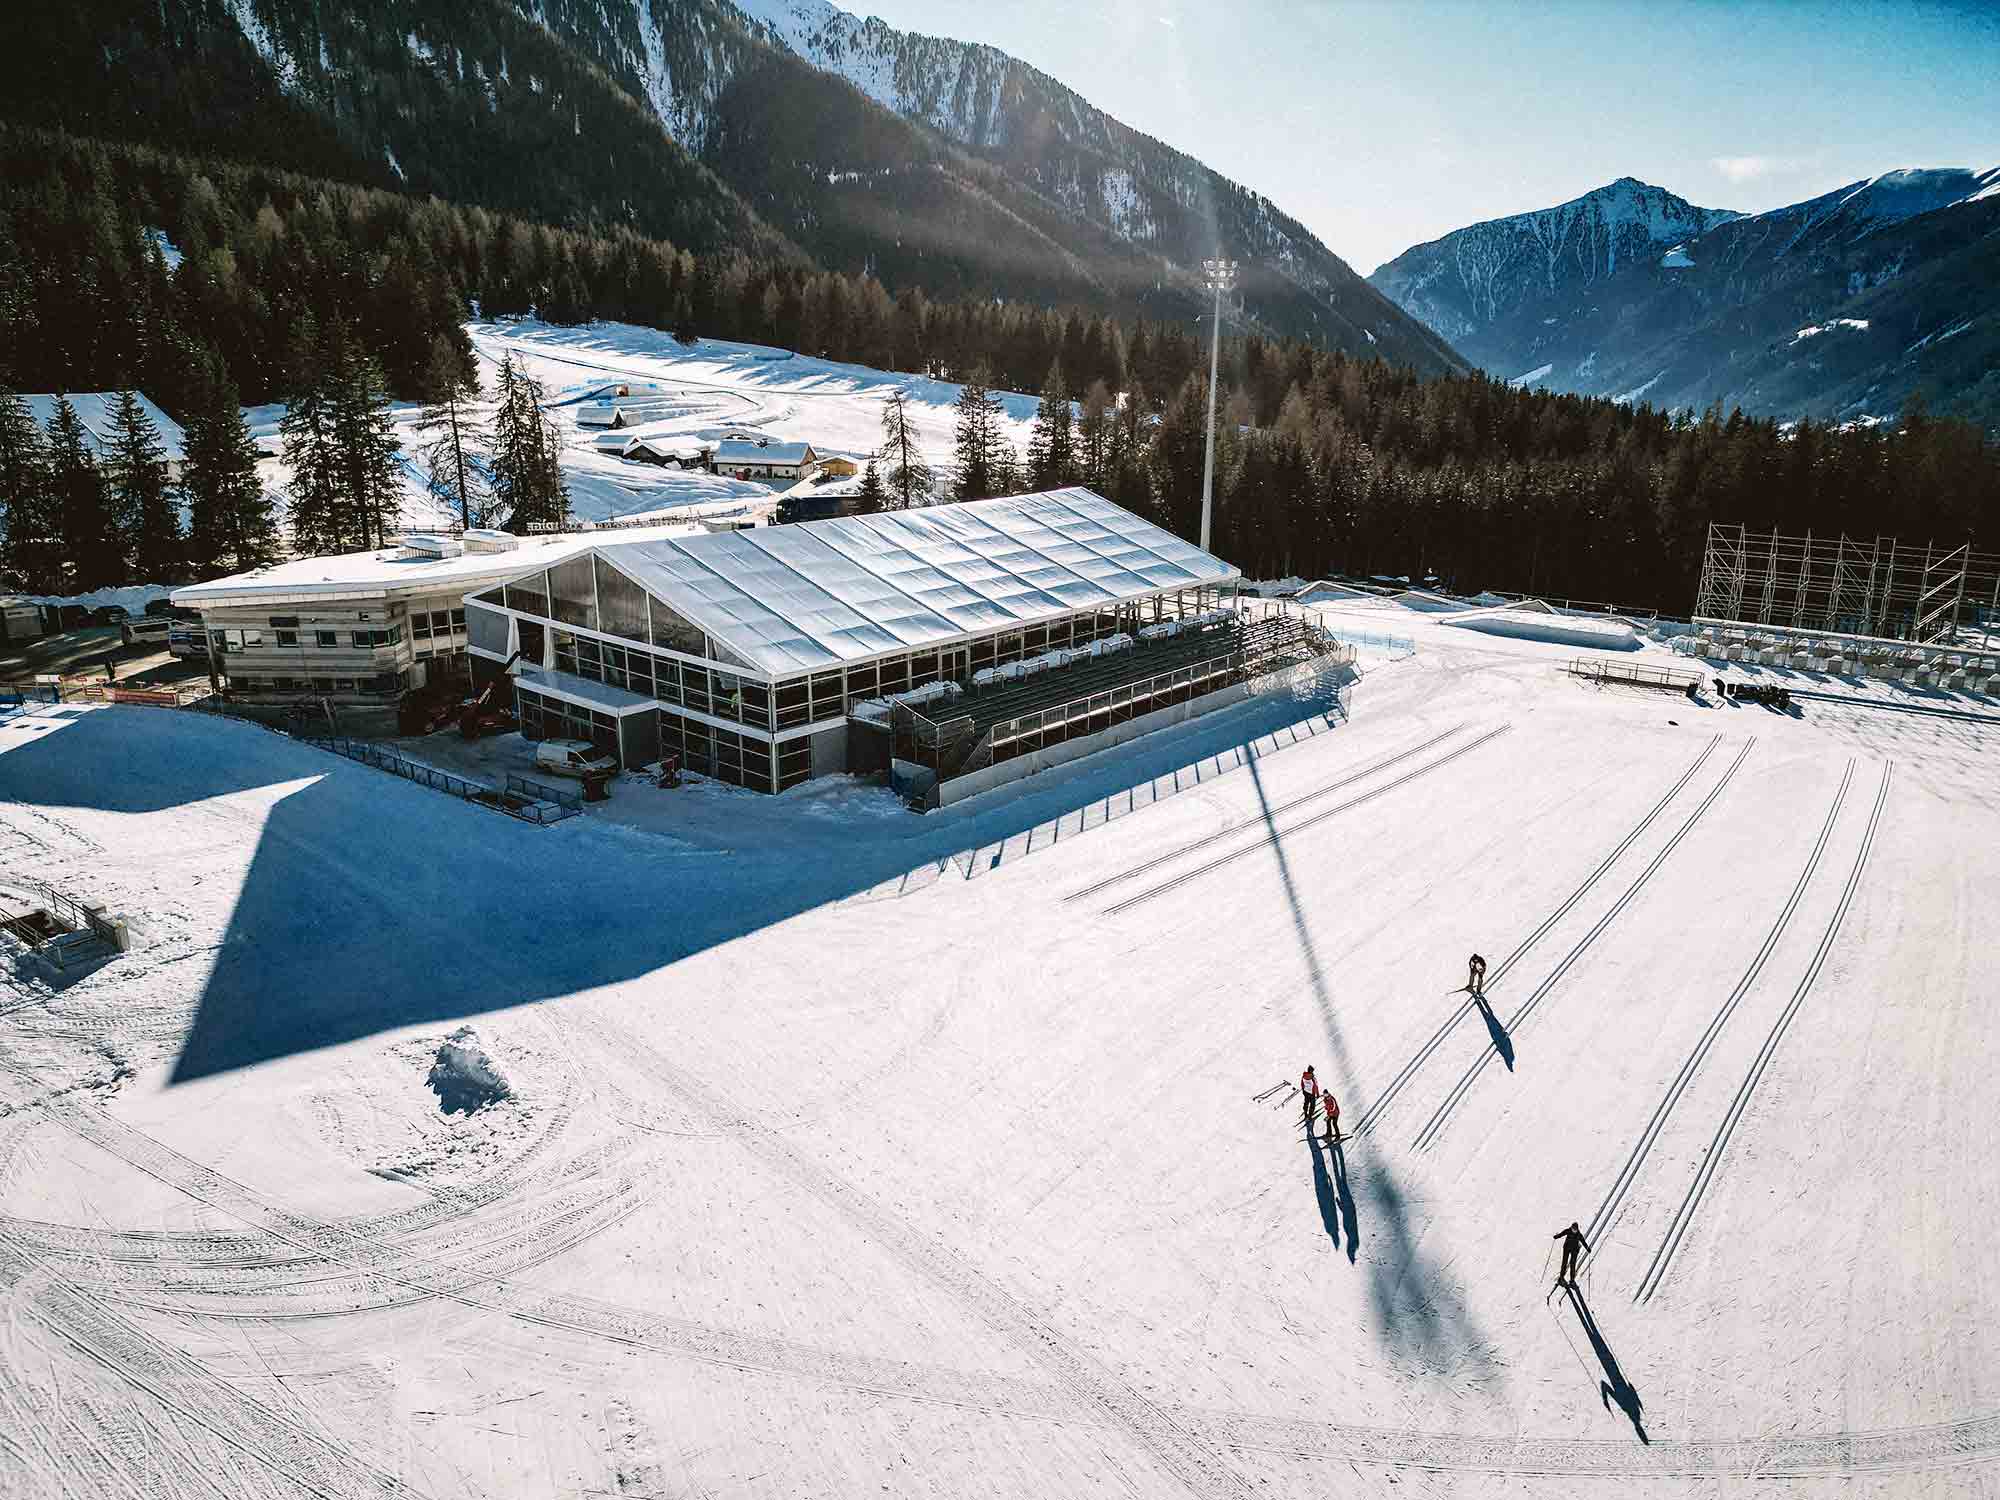 A snow-covered building and some people skiing in the Anterselva valley